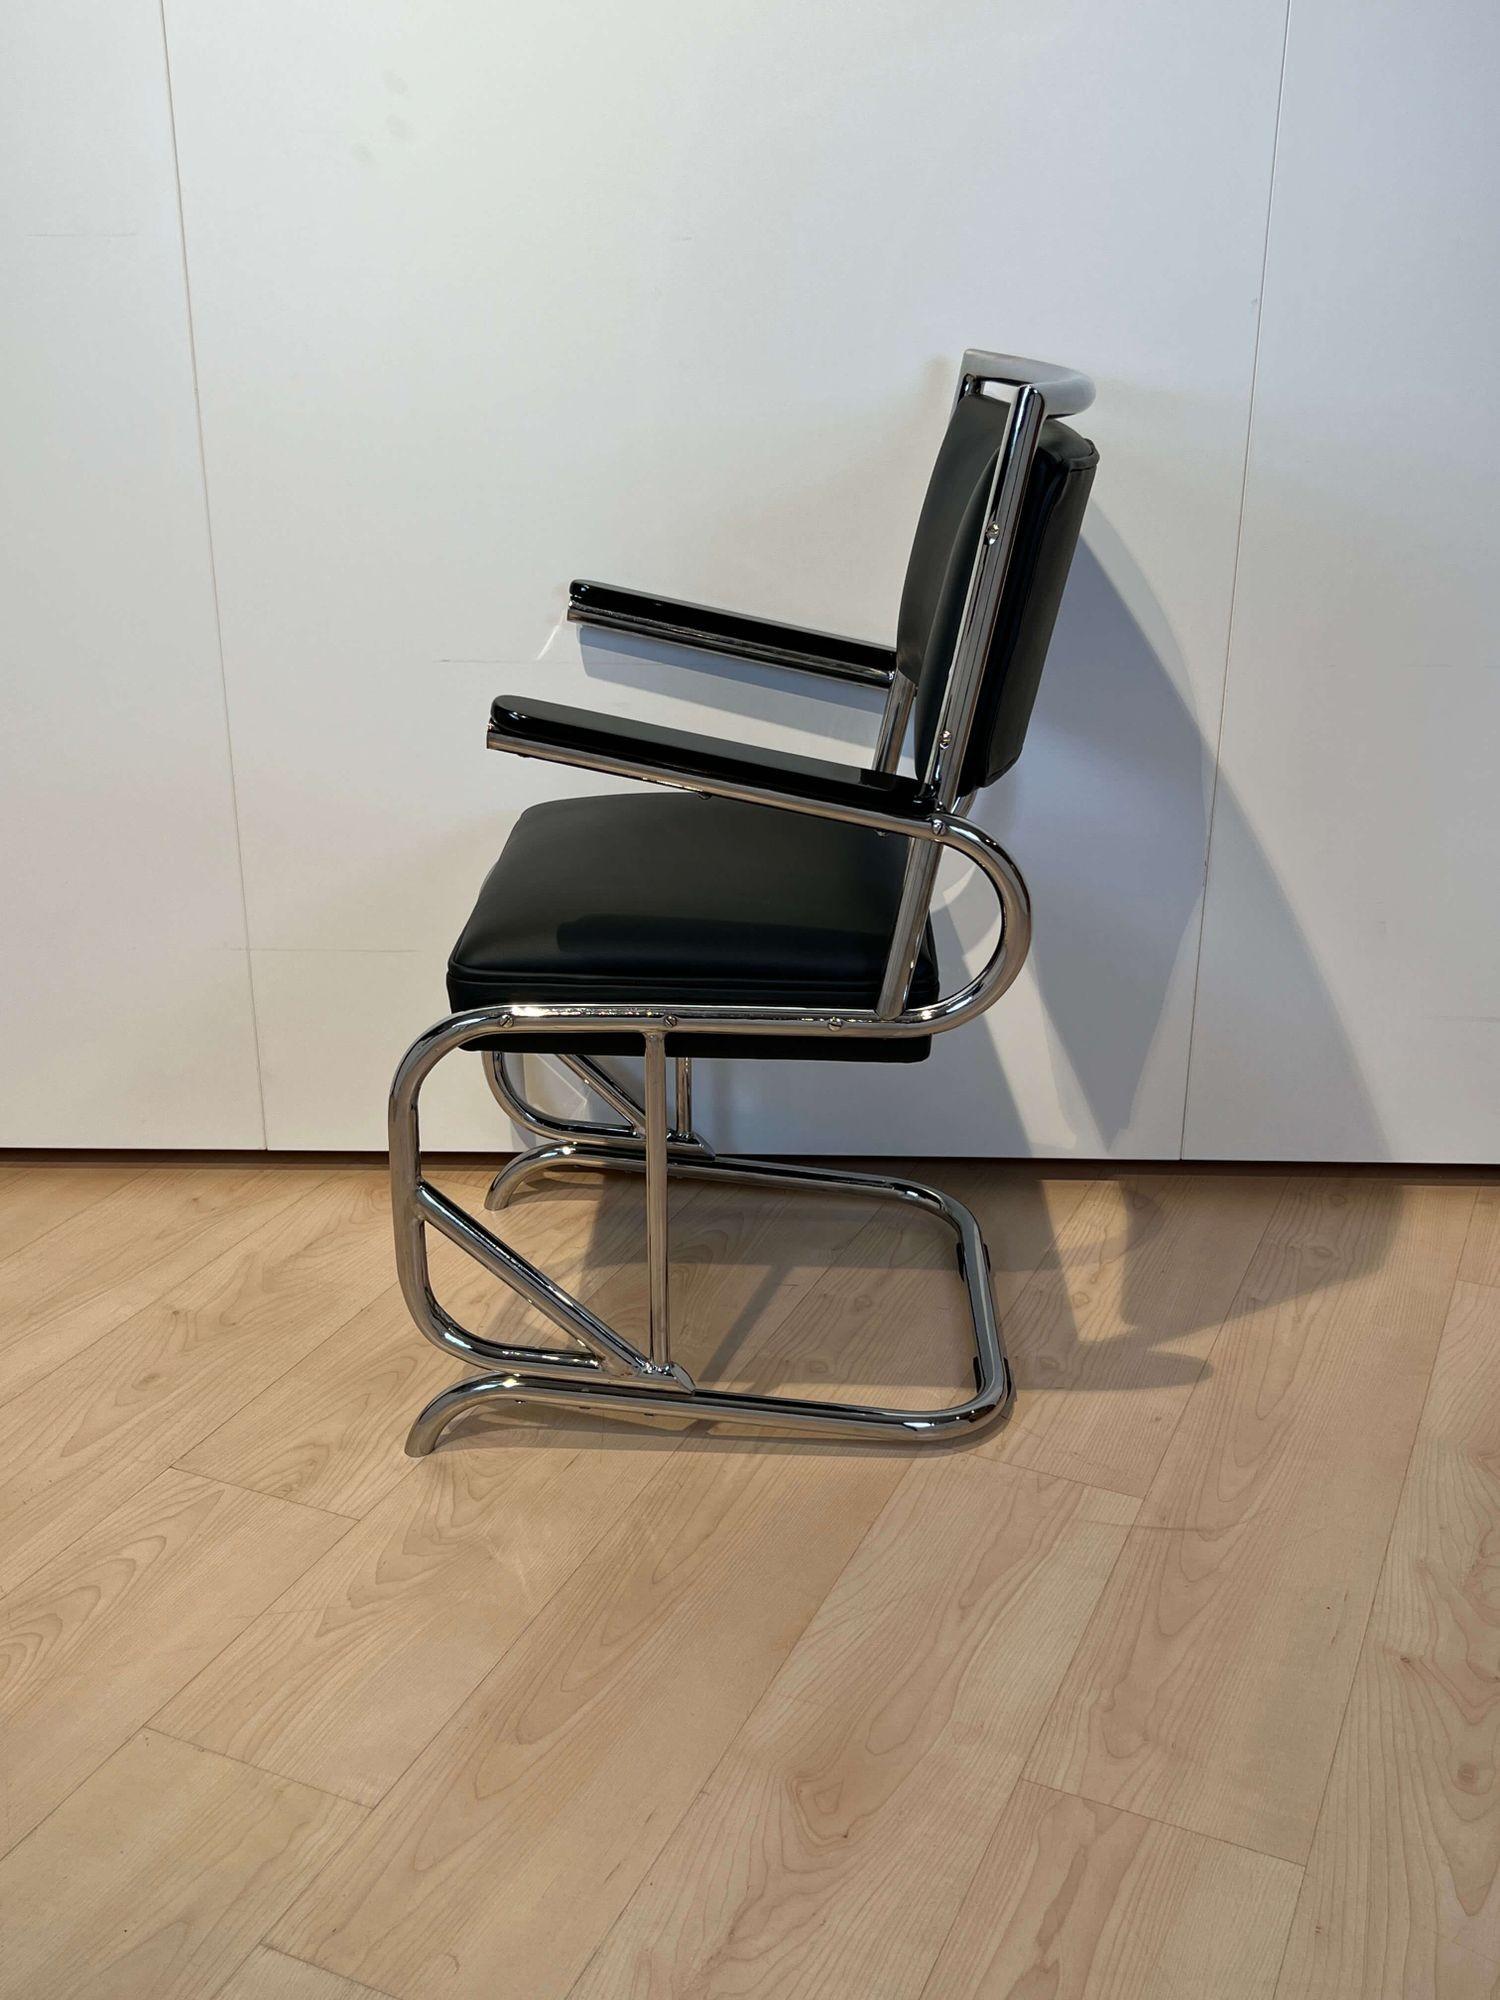 Bauhaus Cantilever Armchair, Chromed, tubular steel, Leather, Germany circa 1935.

Frame completely new chrome-plated. Armrests black high gloss lacquered. Newly upholstered with black leather and keder.
Manufacturer: probably Mauser Waldeck